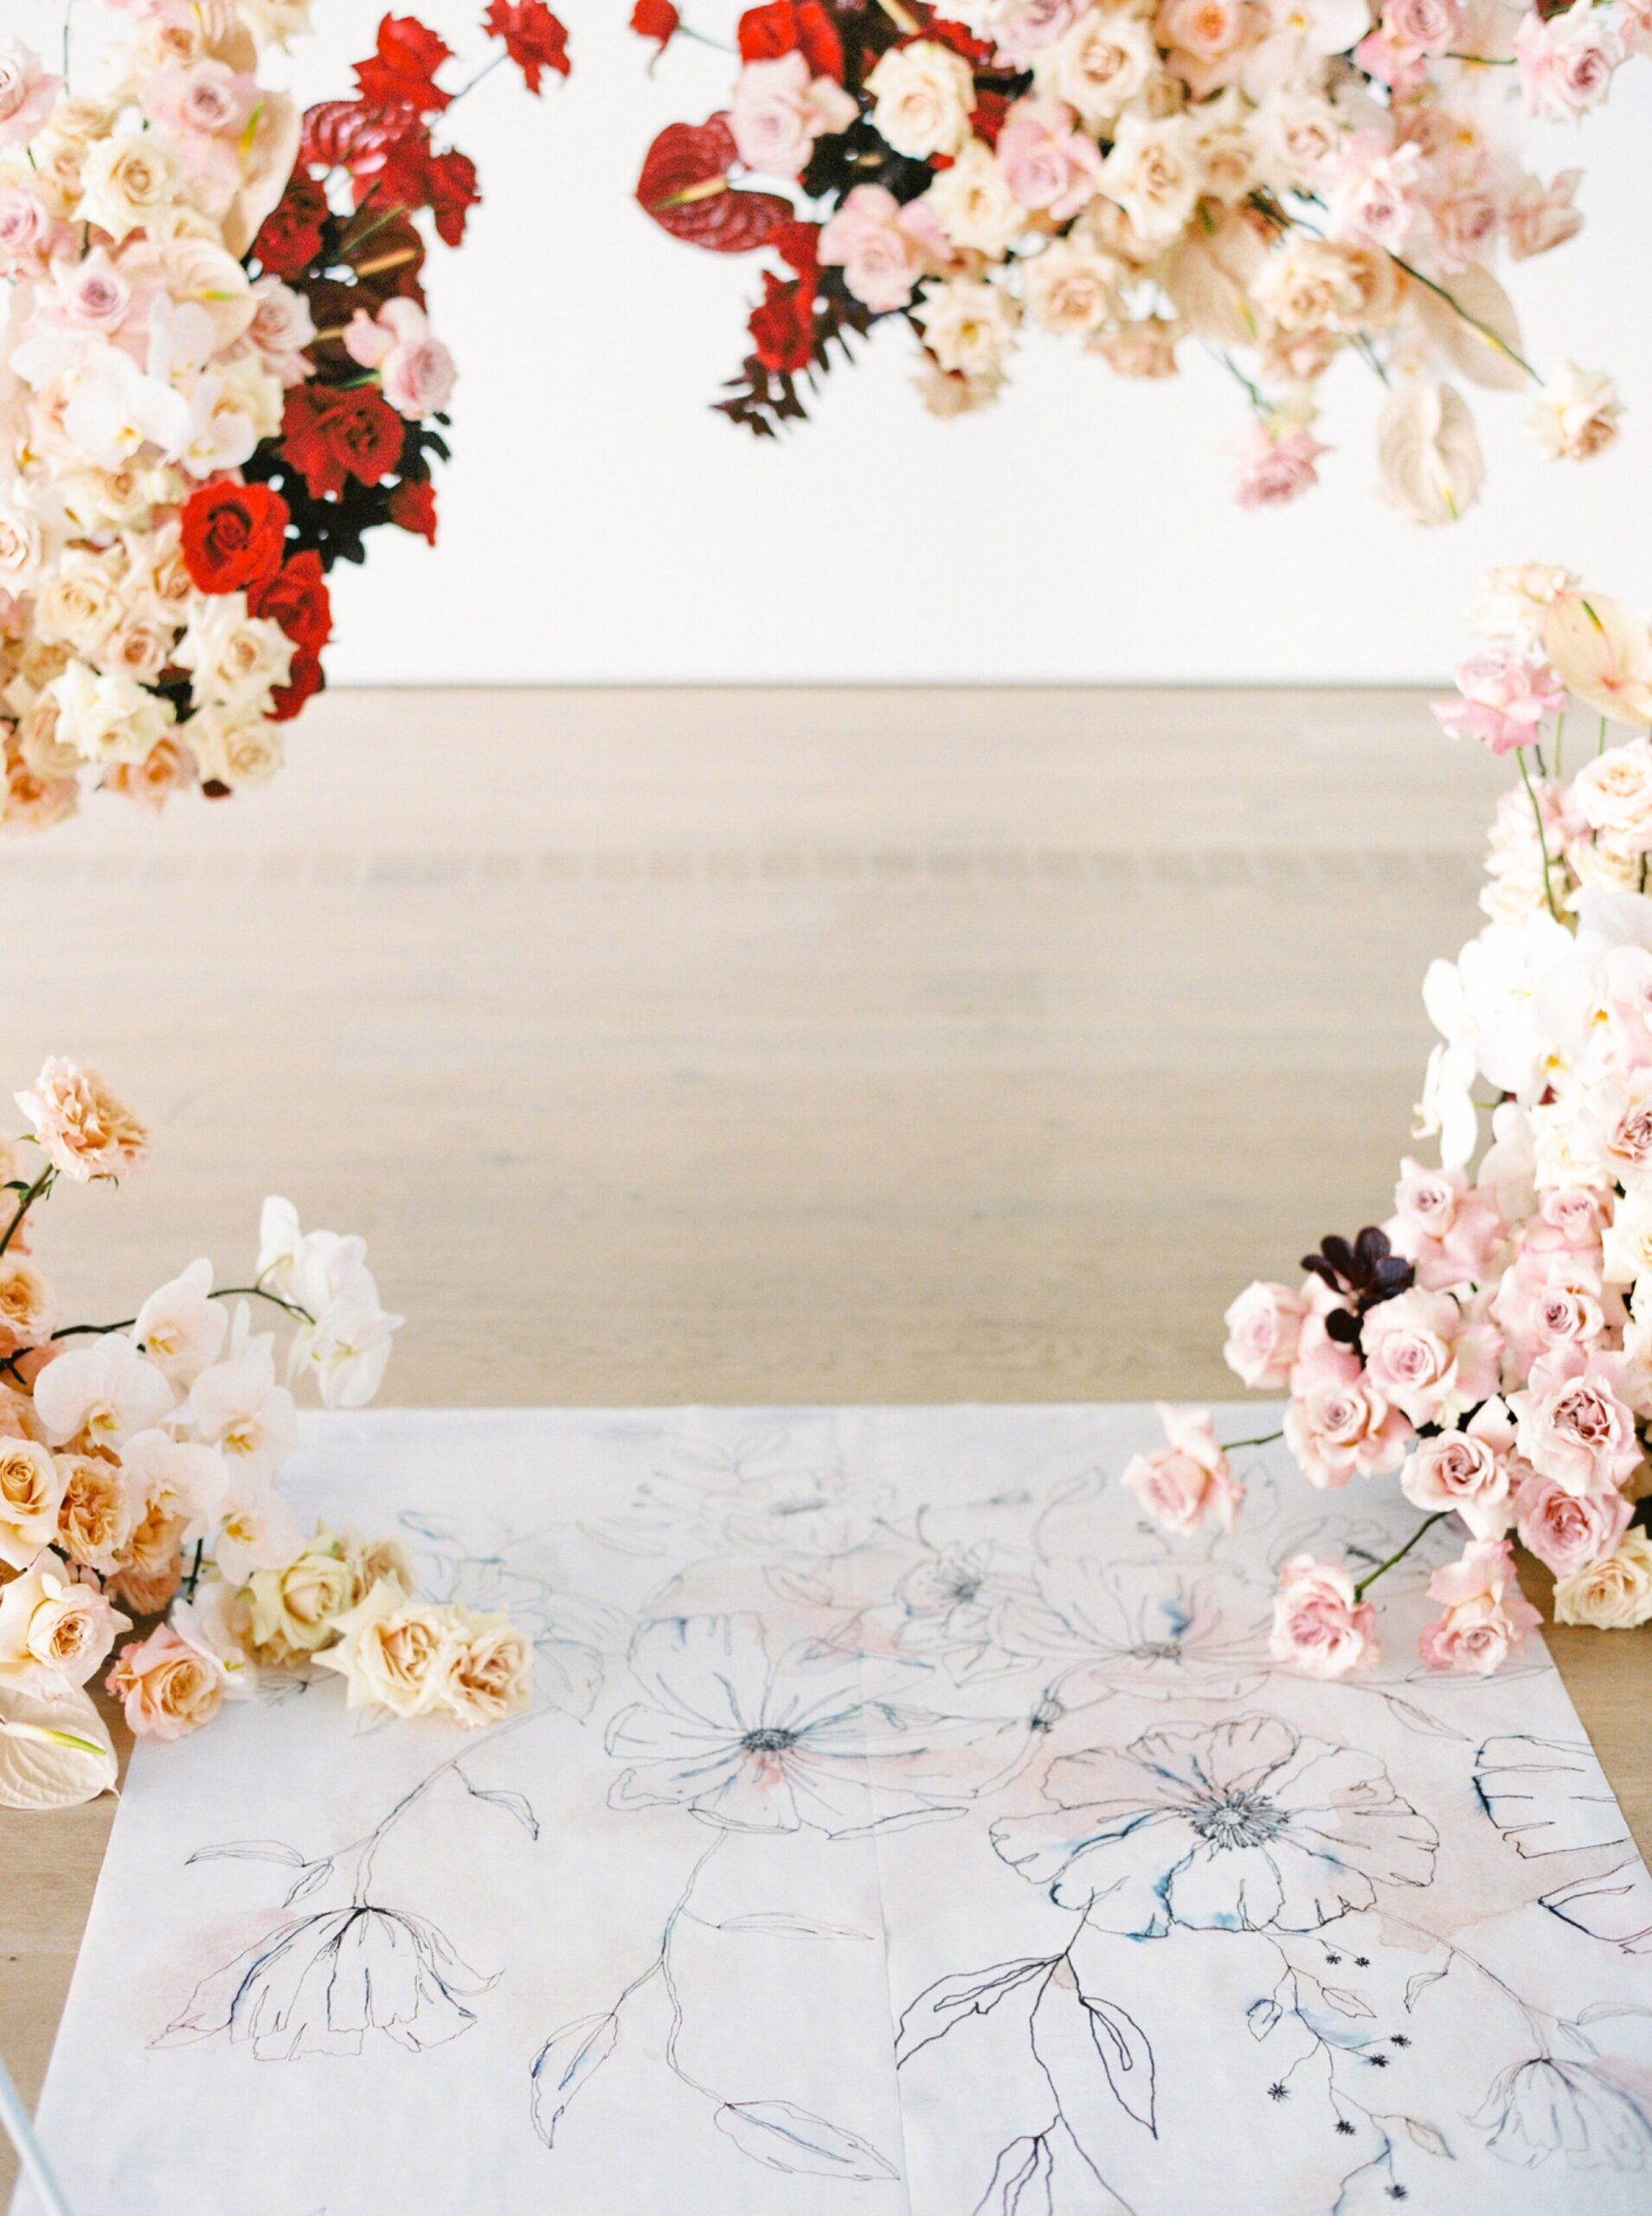  modern bride and floral wedding installation | Pink red and white color blocking florals | Real wedding magazine editorial | Justine Milton fine art film Vancouver wedding photographer 